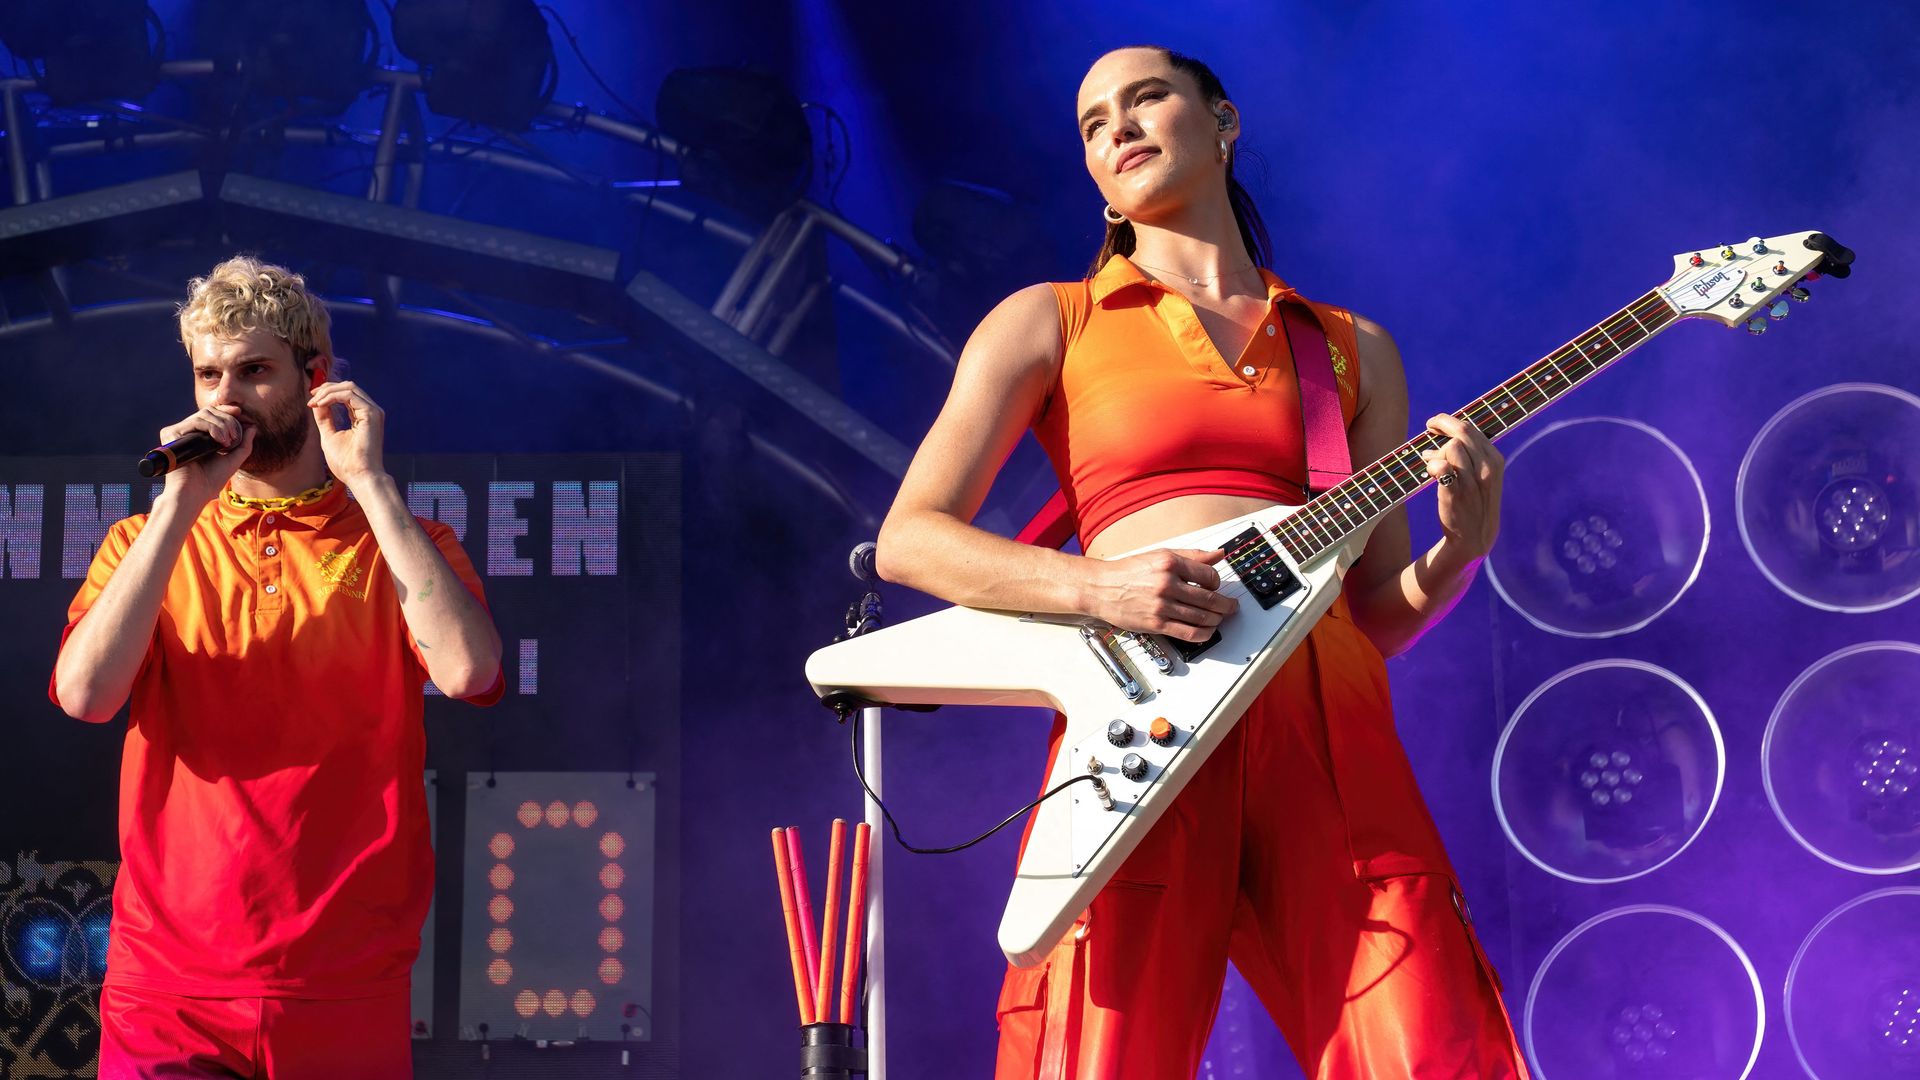 A guy with a microphone and woman with a v-shaped guitar wear bright orange outfits on stage 